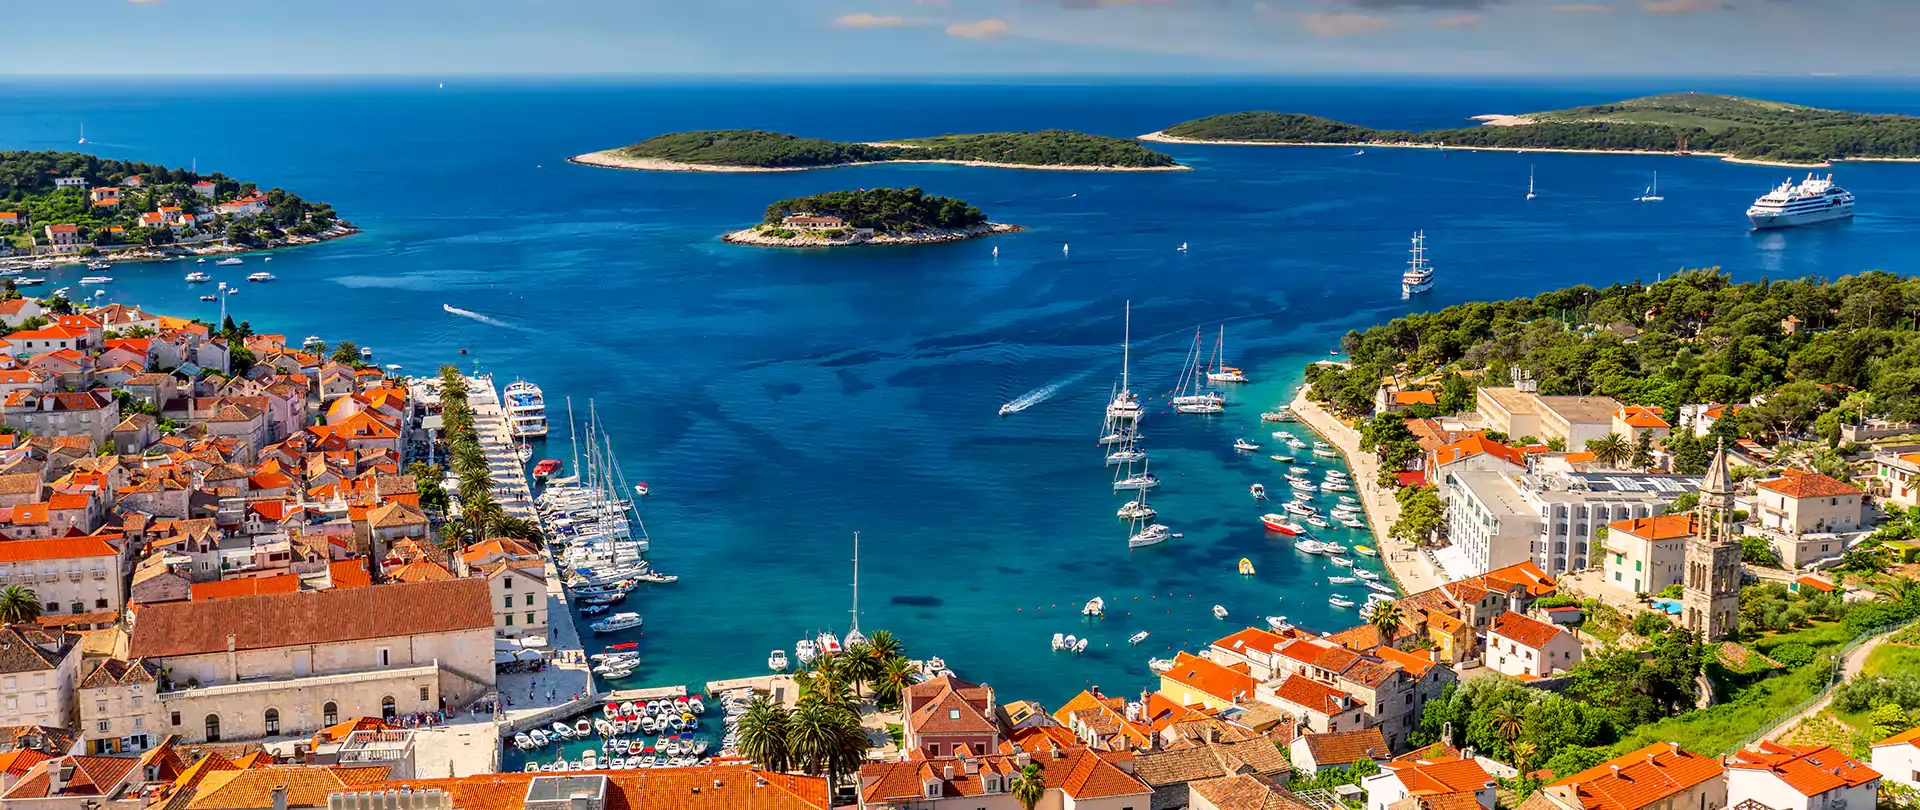  THE ISLAND AND TOWN OF HVAR